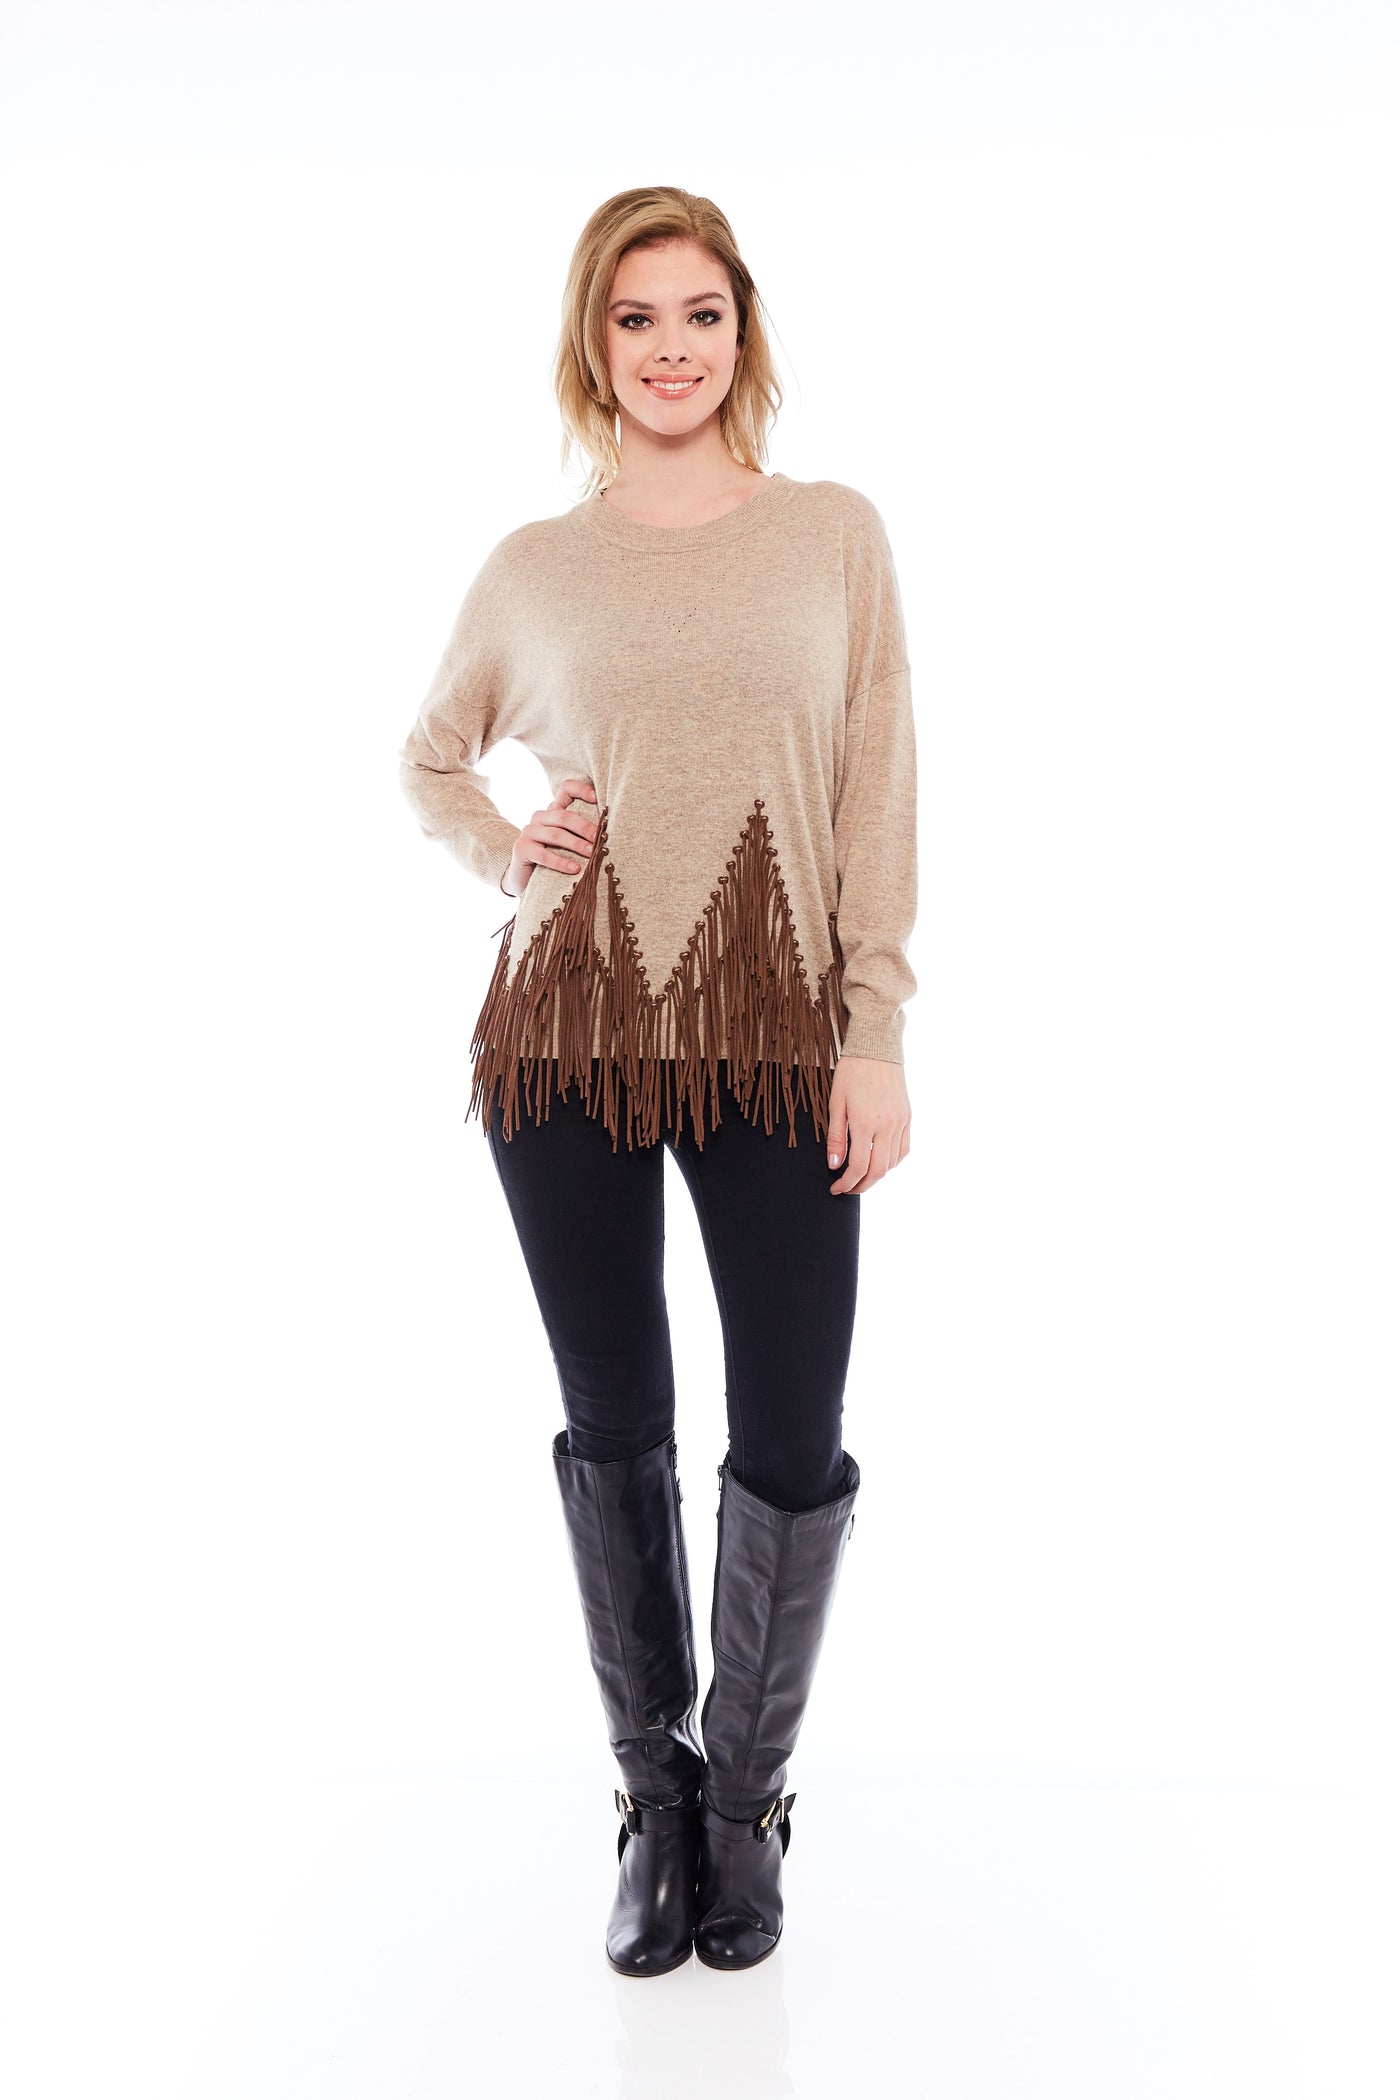 THE ELEVATE HAPPY HOUR SWEATER IN CLASSIC BEIGE